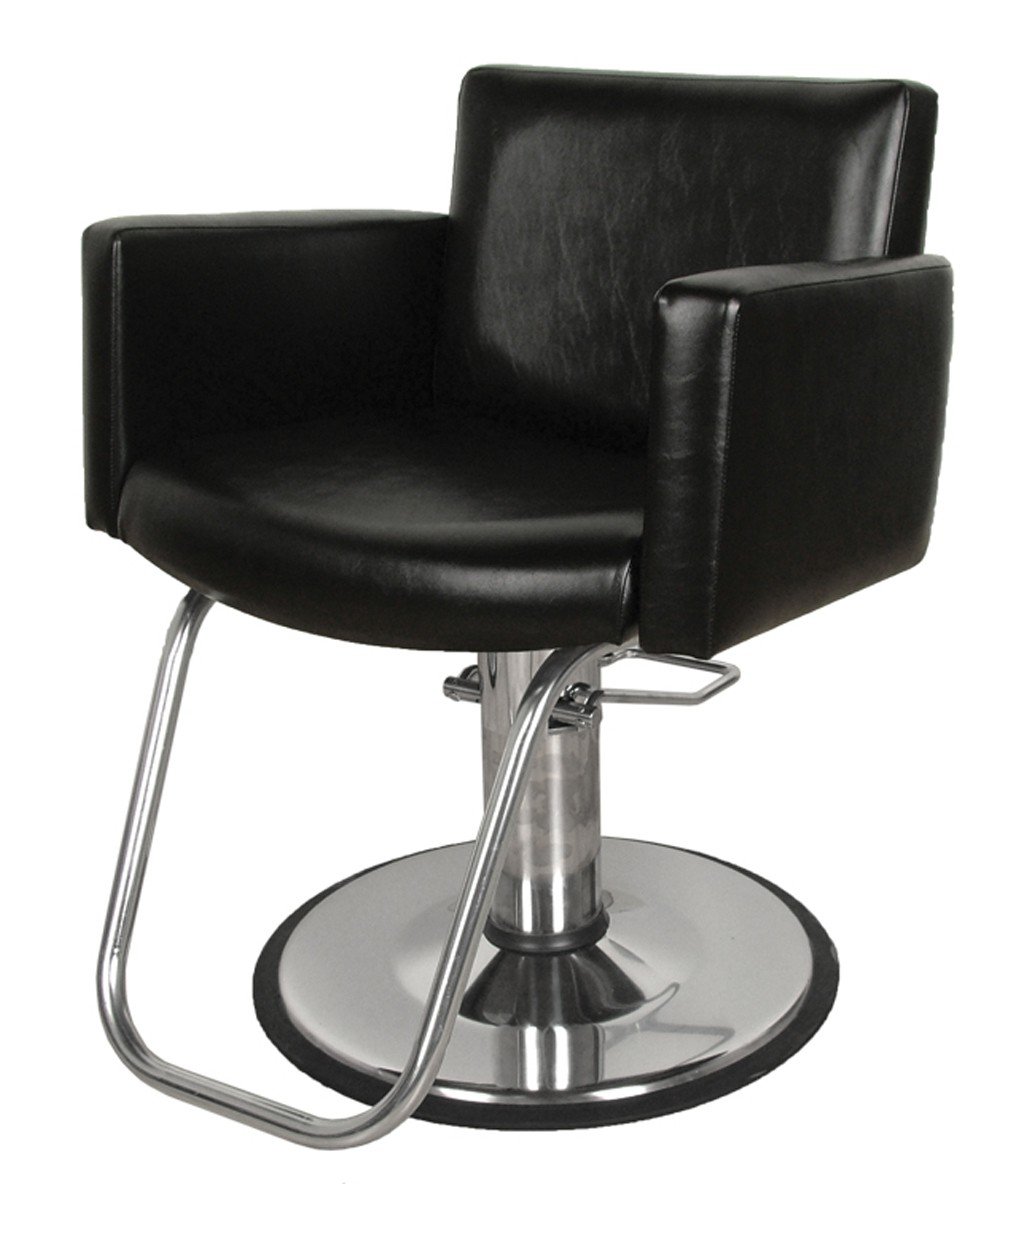 Collins 6900 Cigno Styling Chair